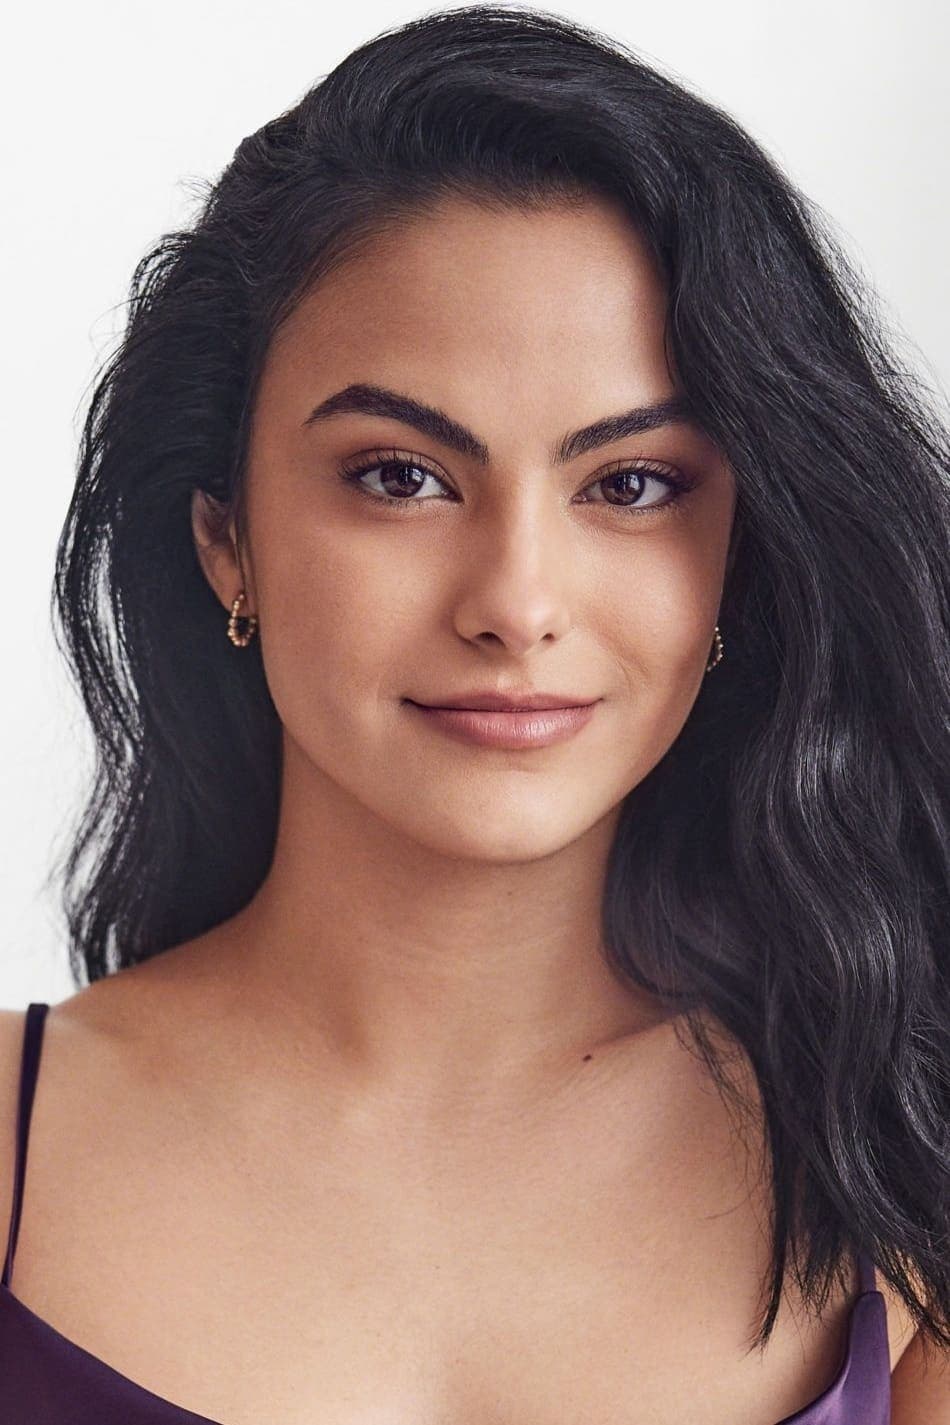 Camila Mendes | Shelby Pace